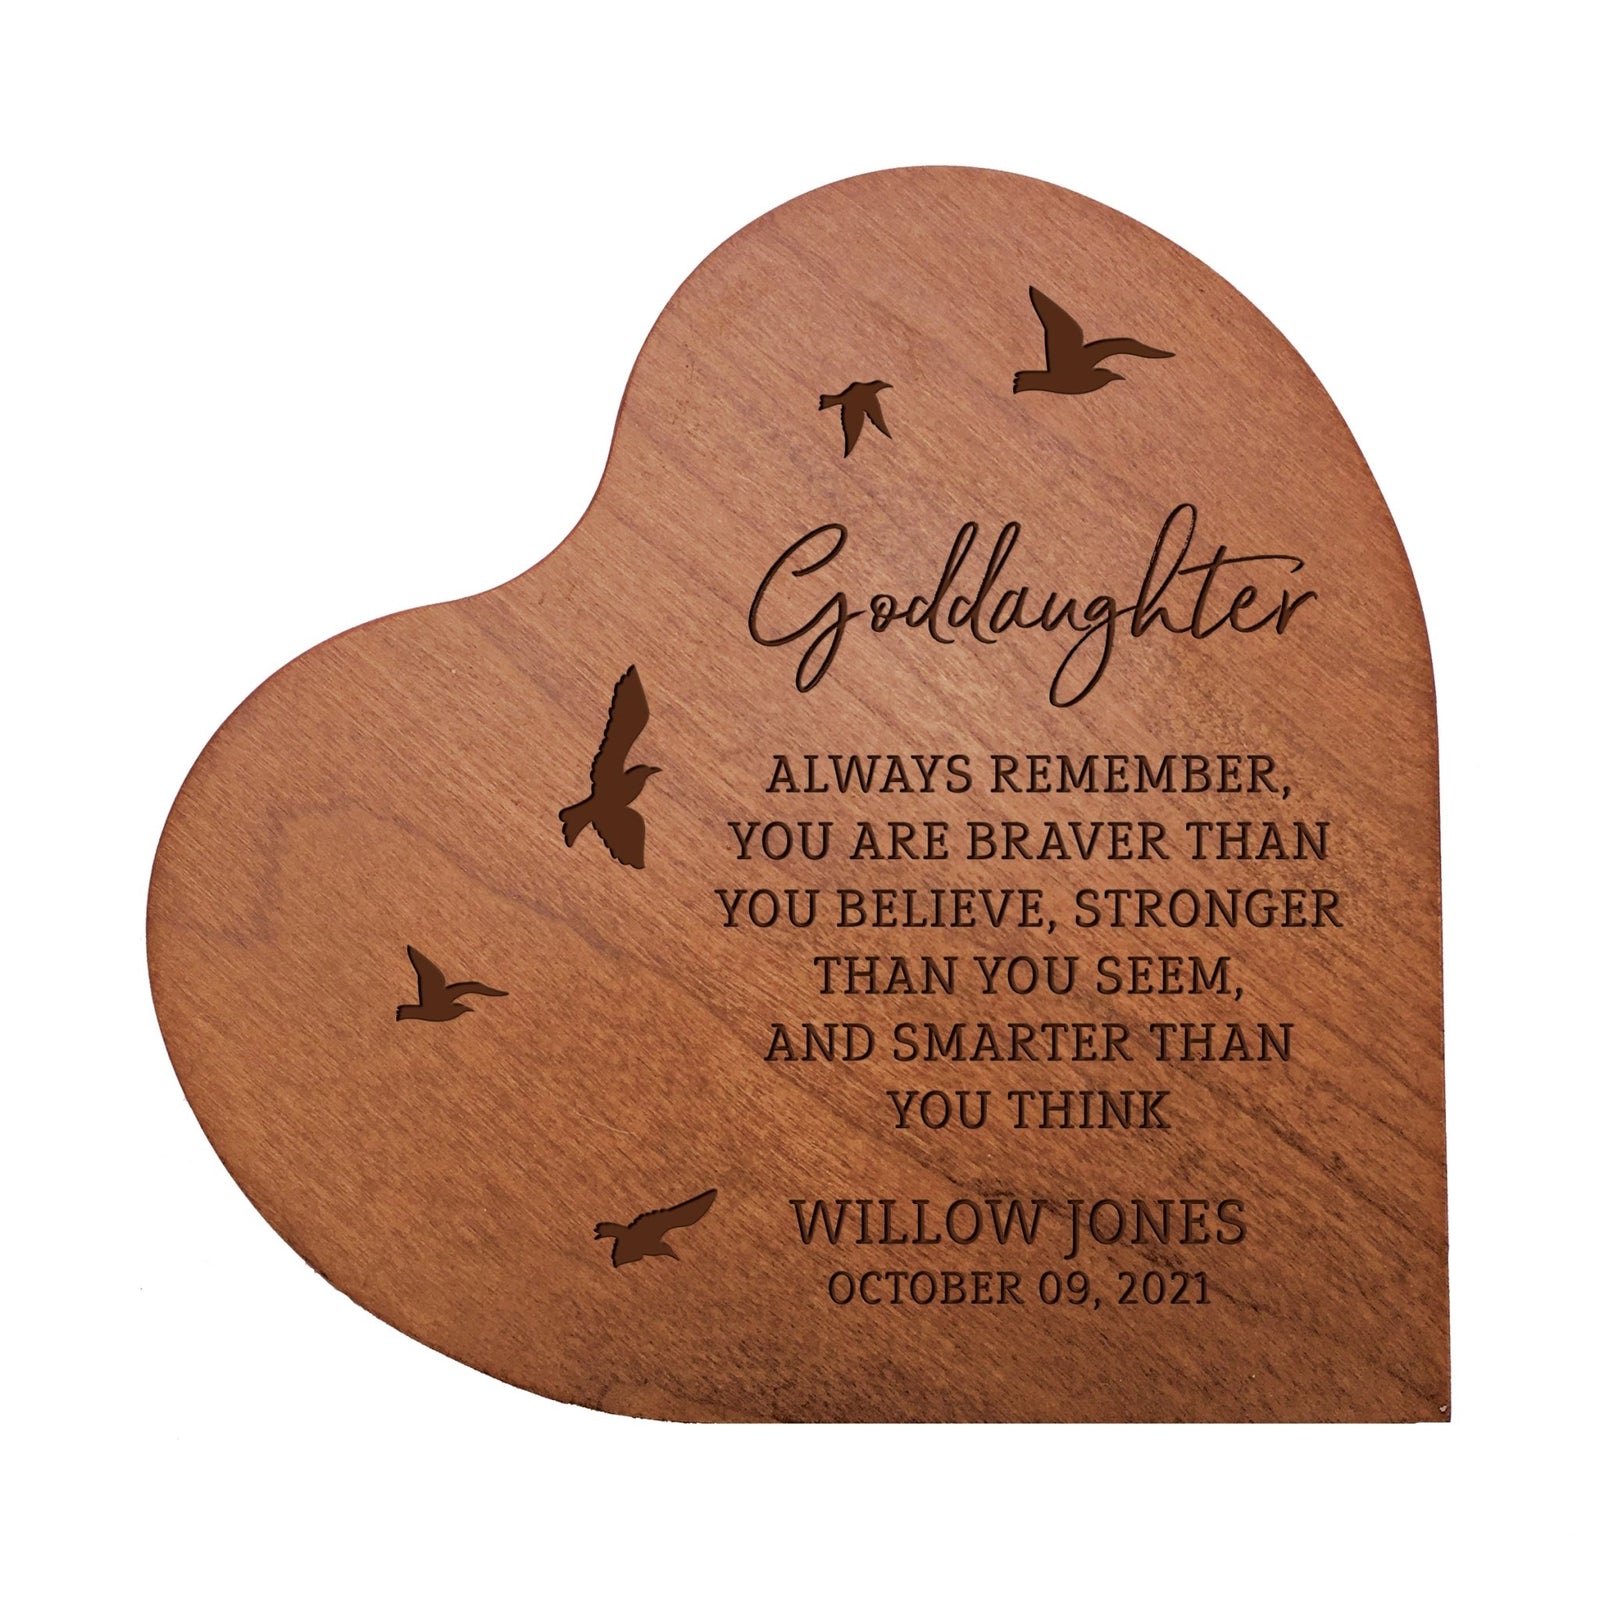 Personalized Modern Goddaughter’s Love Solid Wood Heart Decoration With Inspirational Verse Keepsake Gift 5x5.25 - Always Remember - LifeSong Milestones